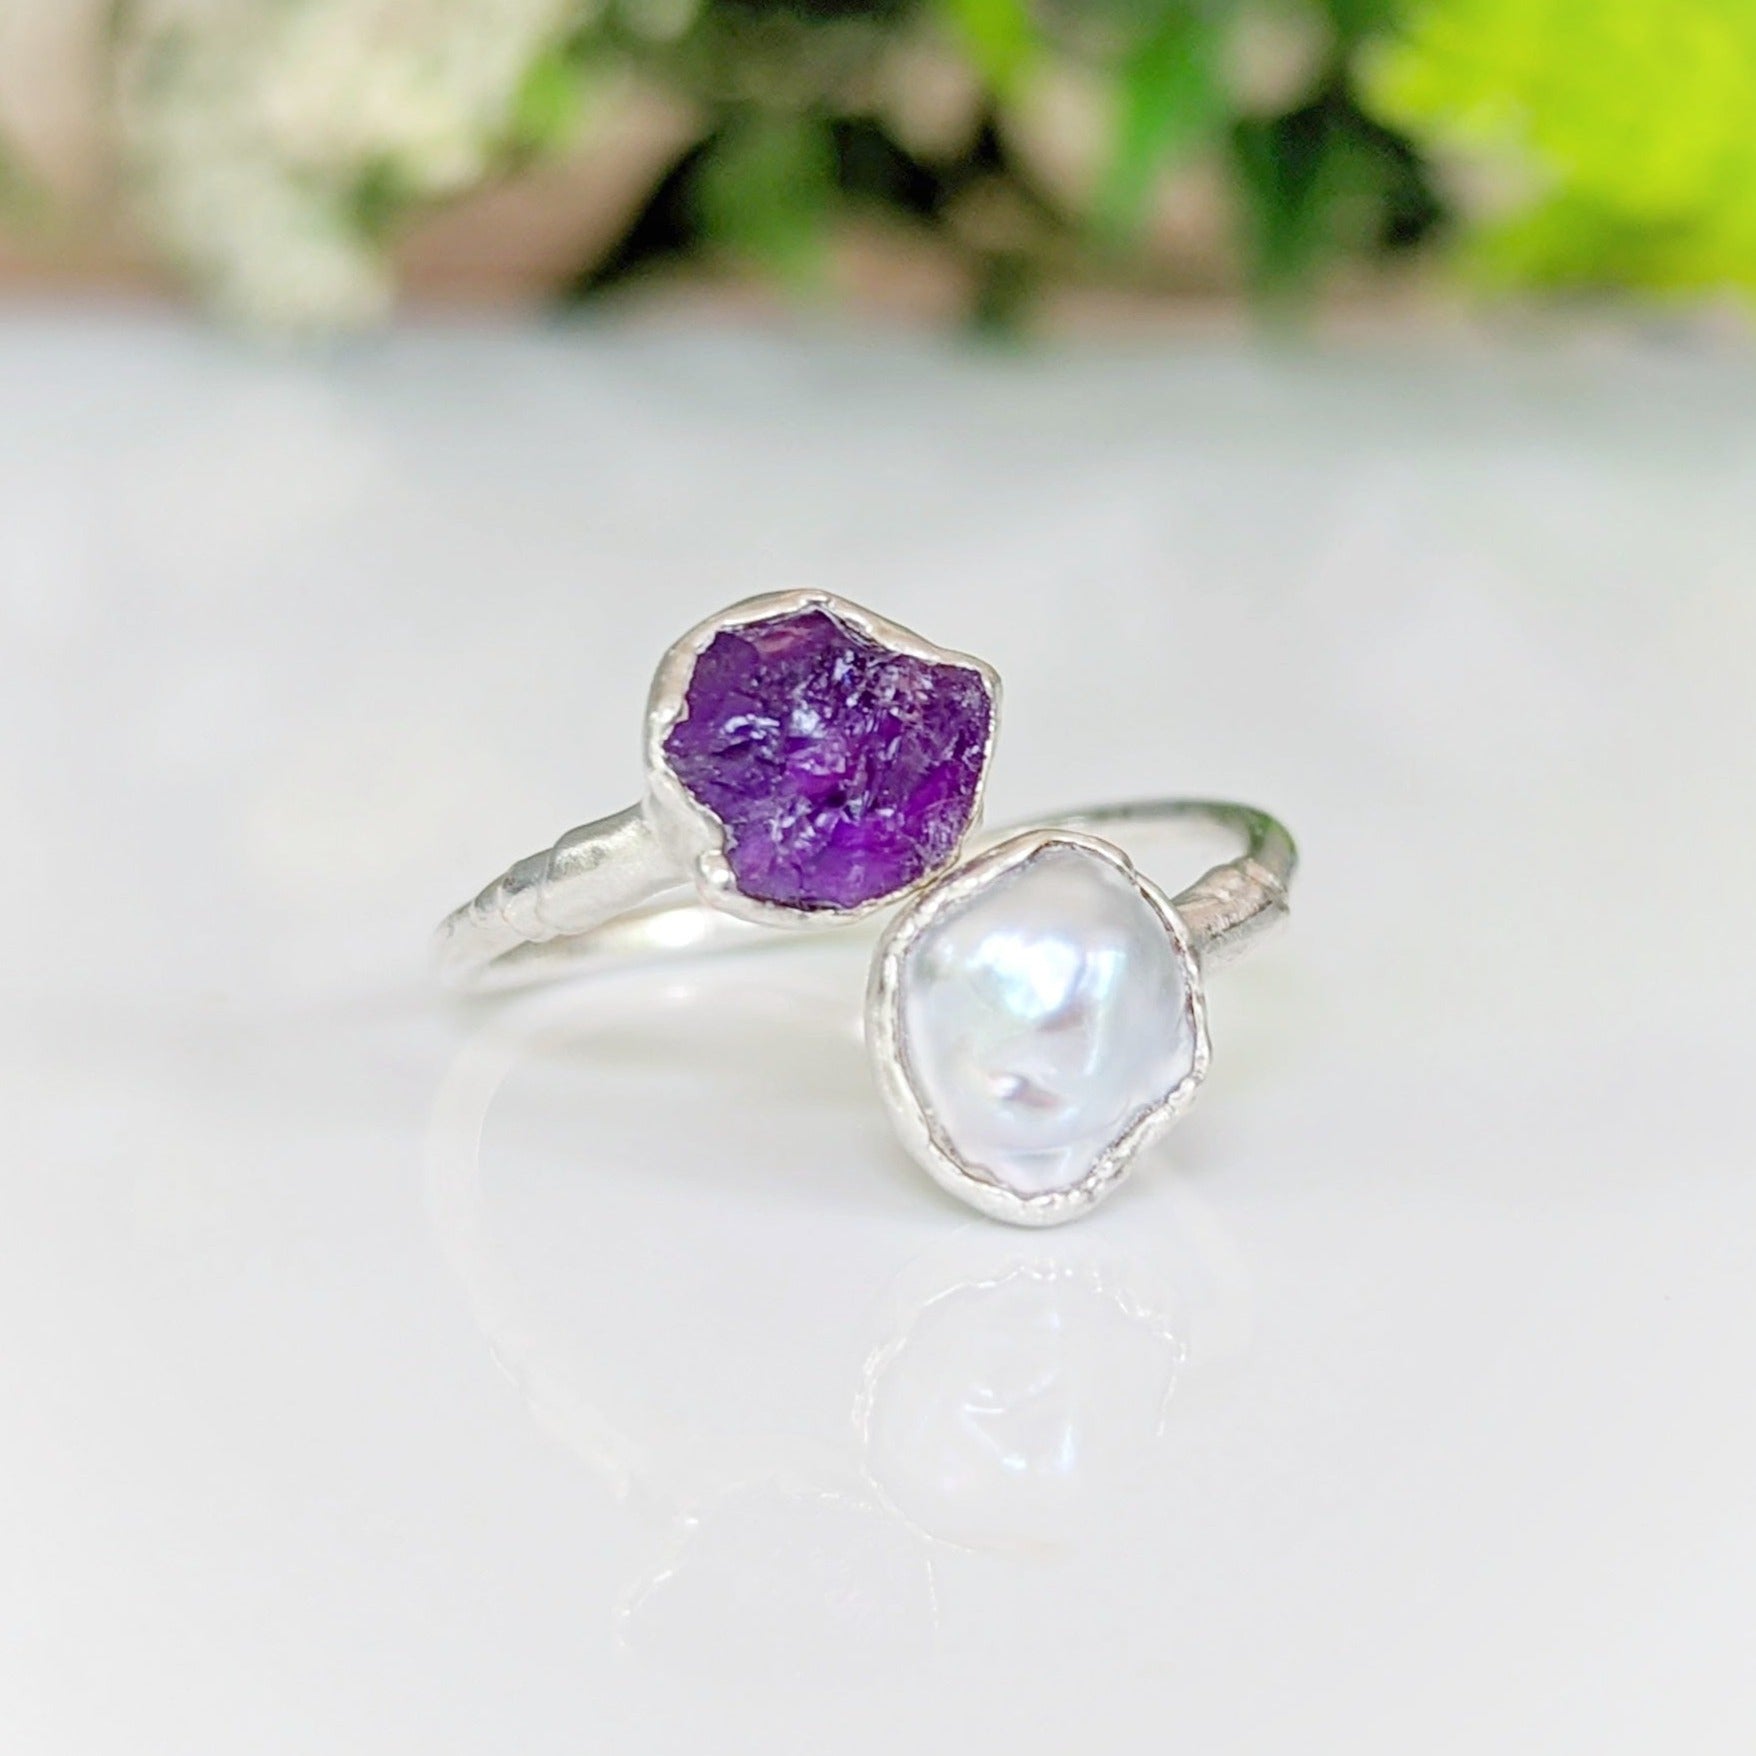 Toi et Moi raw gemstone ring ~ Family Birthstone ring in unique Fine 99.9 Silver setting